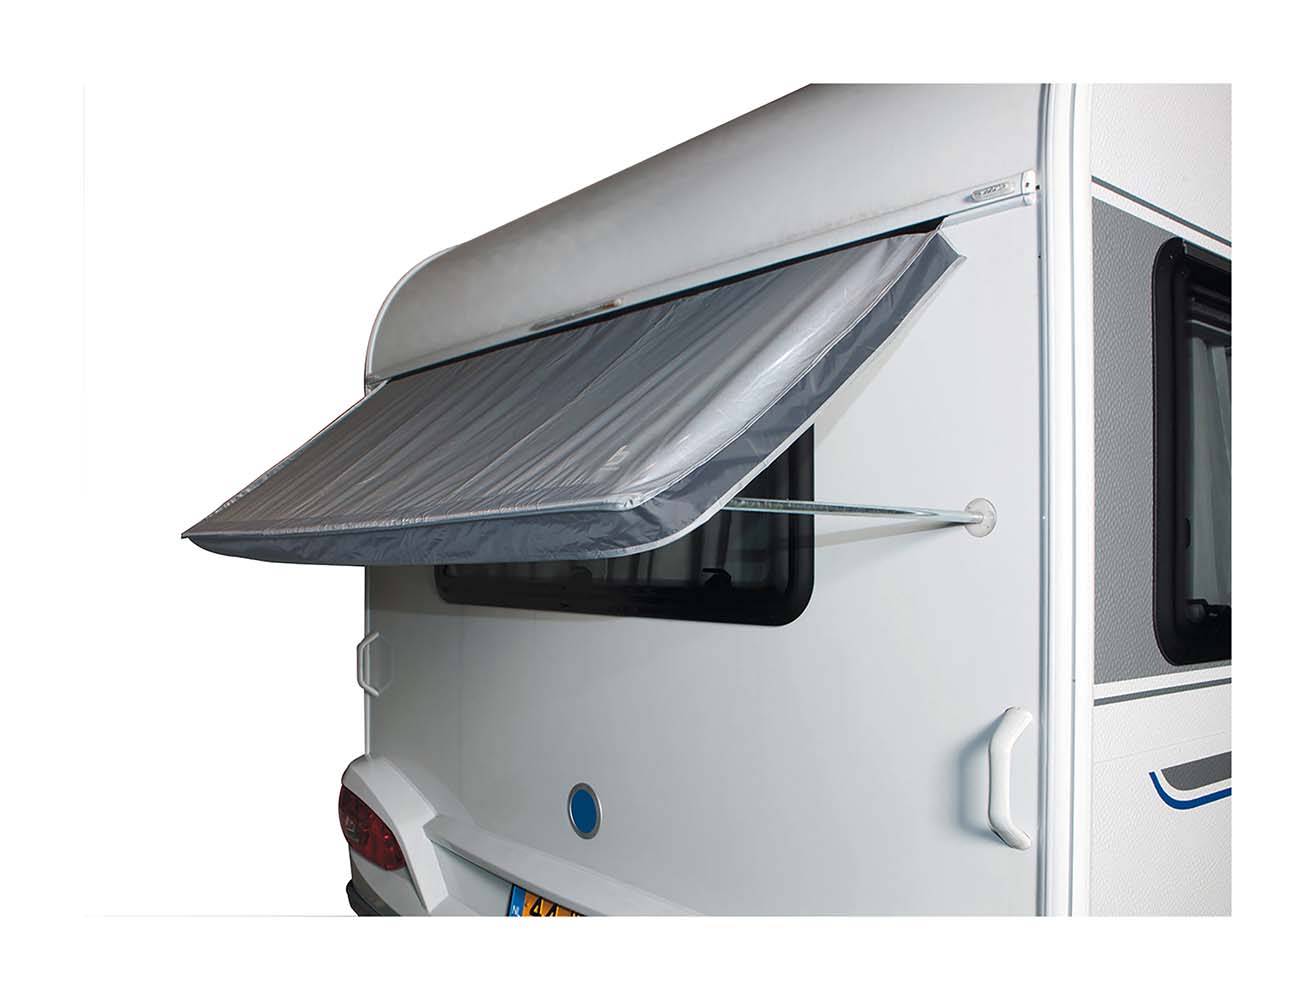 4117730 A handy awning for a caravan window. Keeps the sun and warmth outside the caravan. This caravan window awning can be attached with a string to the caravan rail and features suction cups on the galvanized steel frame for fixing to the caravan. With side flaps and tensioning points at the bottom corners. This fabric has a PU coating with a water column of 2000 mm.